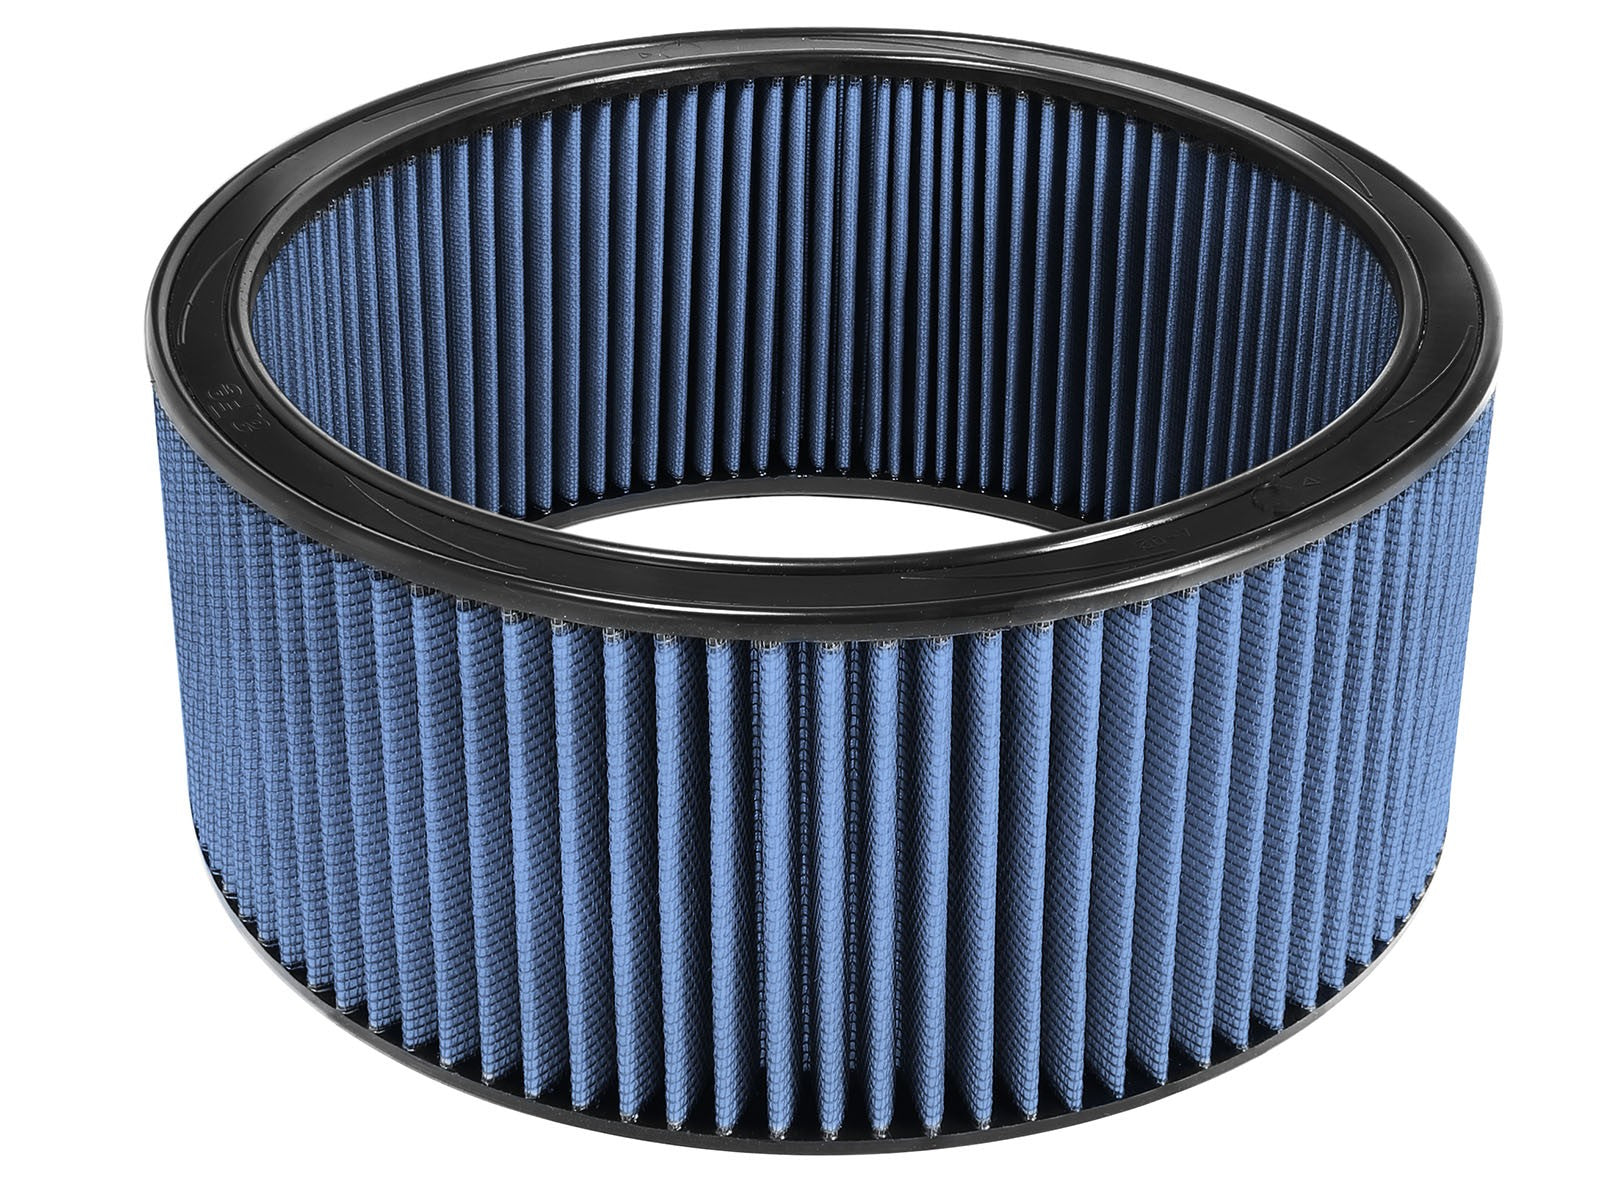 Magnum FLOW Round Racing Air Filter w/ Pro 5R Media 14 IN OD x 12 IN ID x 6 IN H